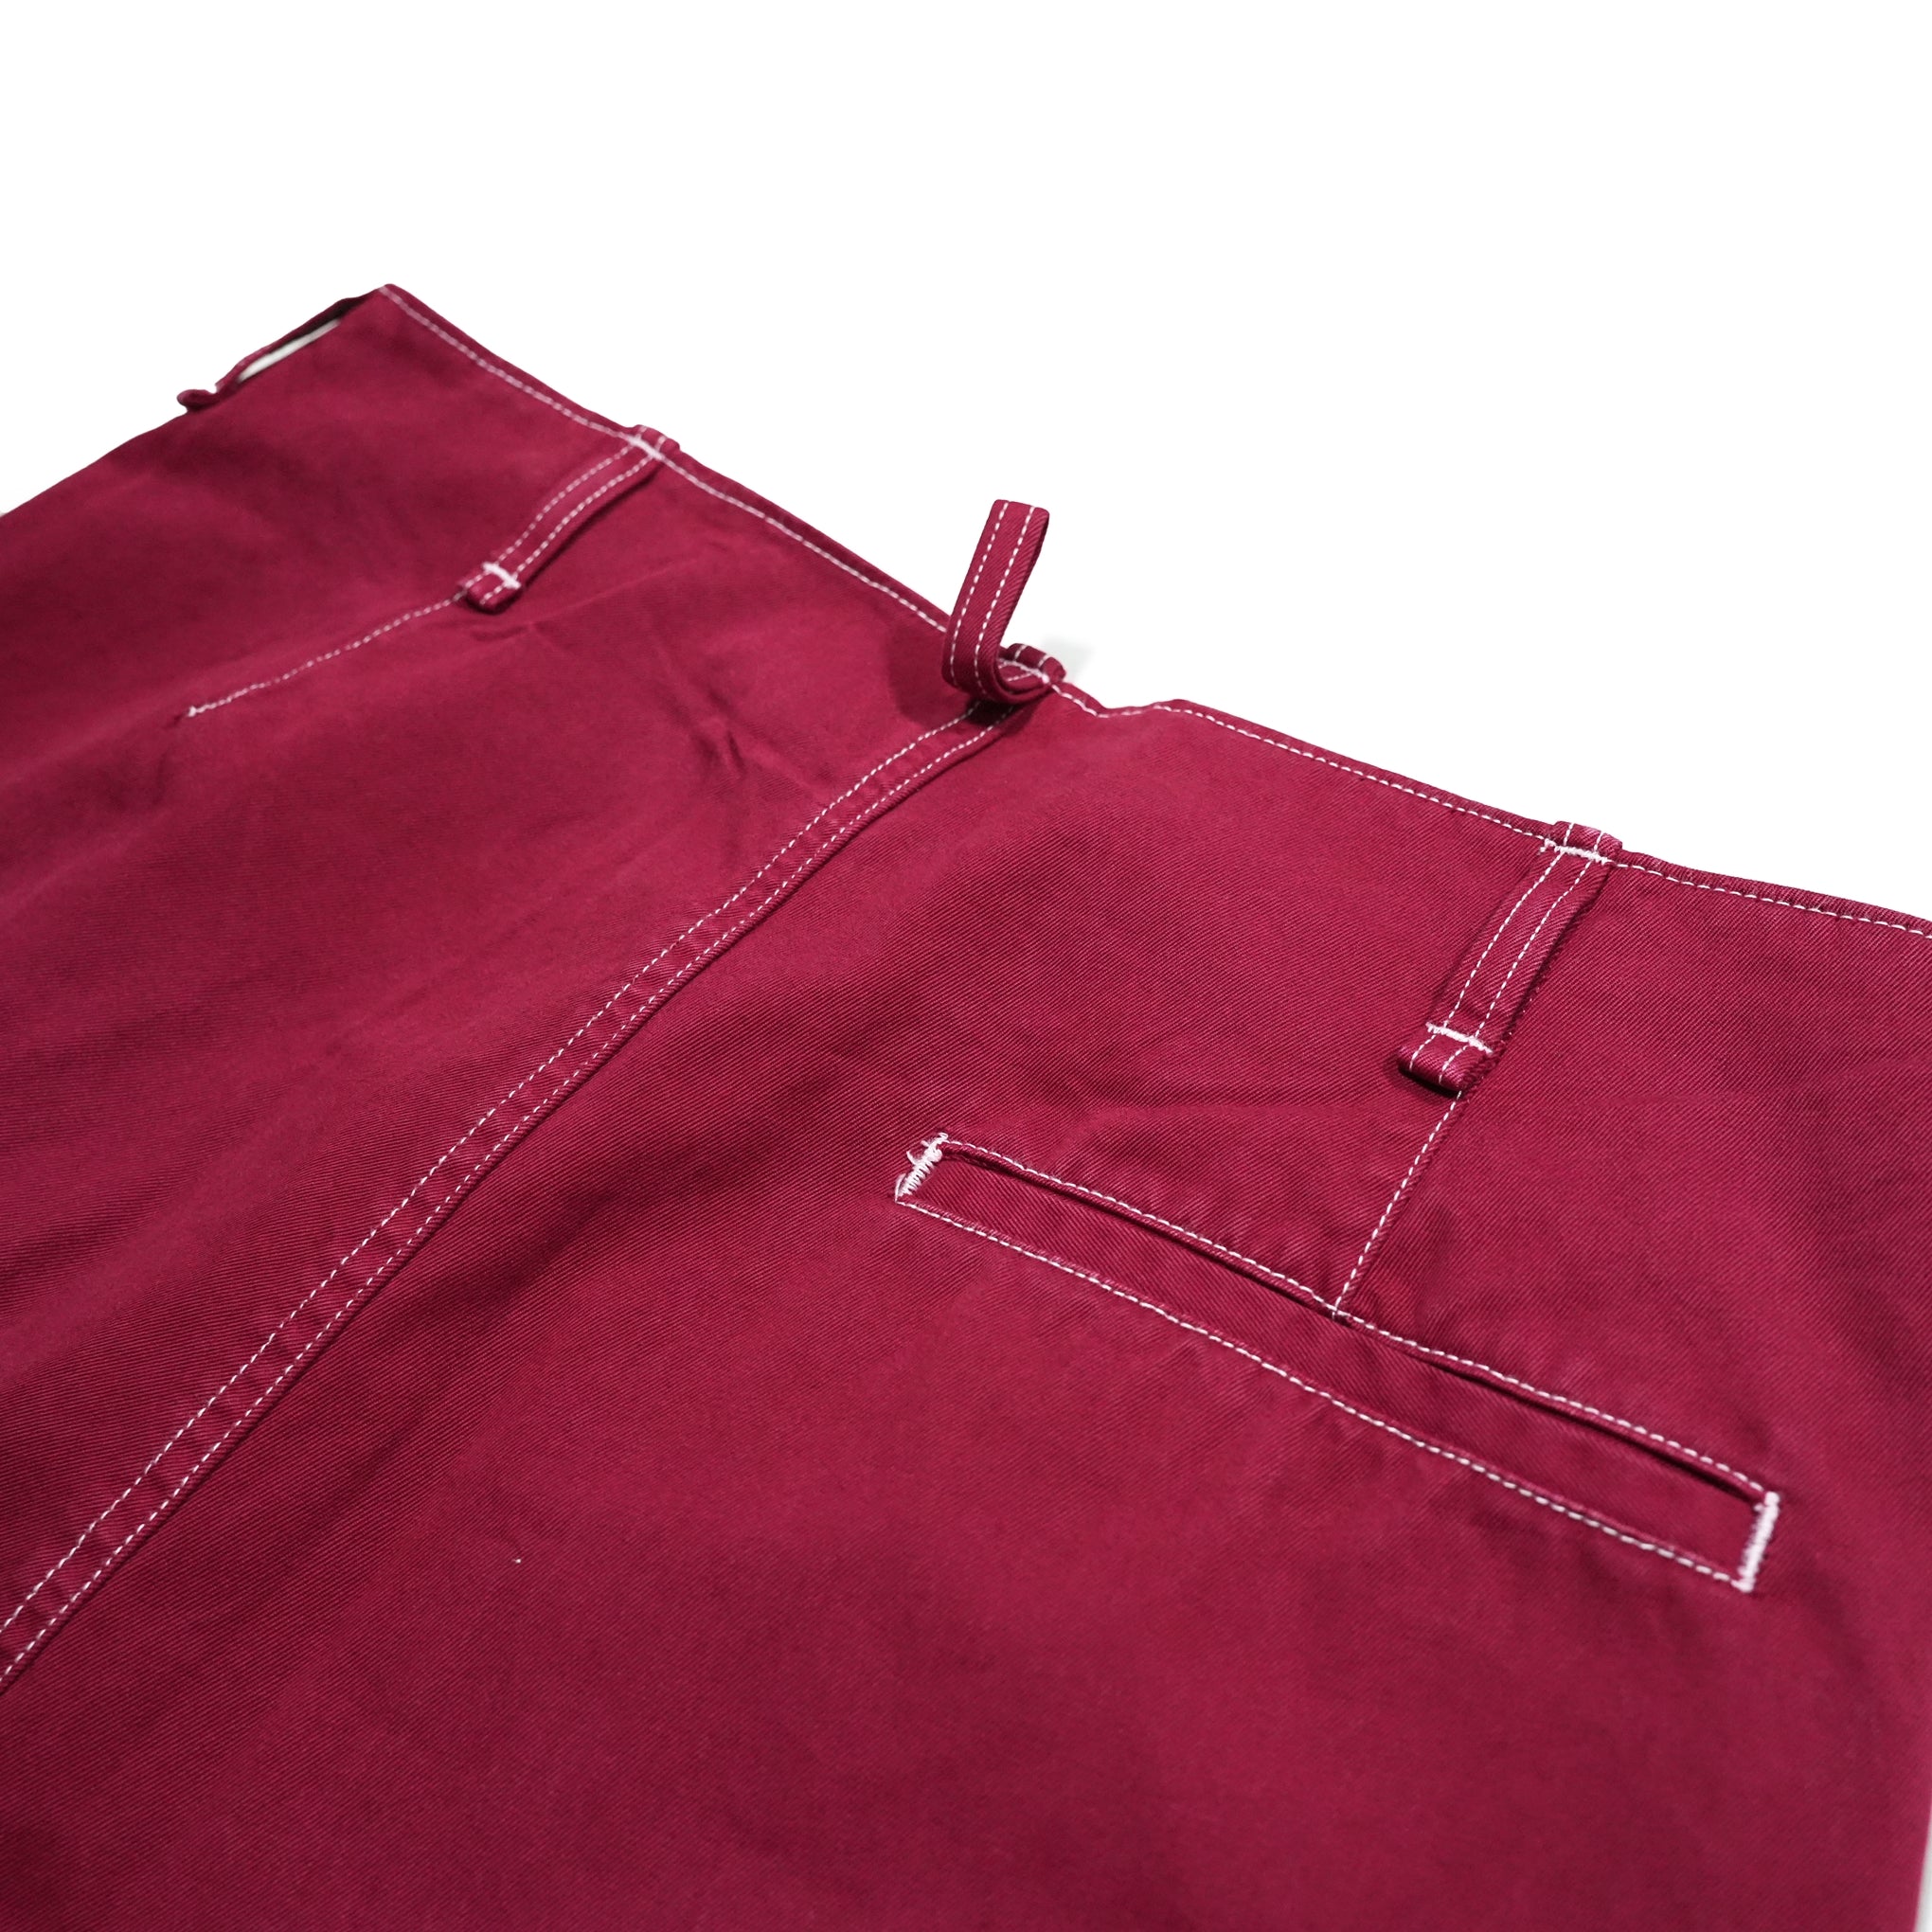 No:23#05373-4210 | Name:FRENCH ARMY CHINO Vintage 50’S | Color:ベージュ/レッド【MINAMI ANDERSON_ミナミアンダーソン】